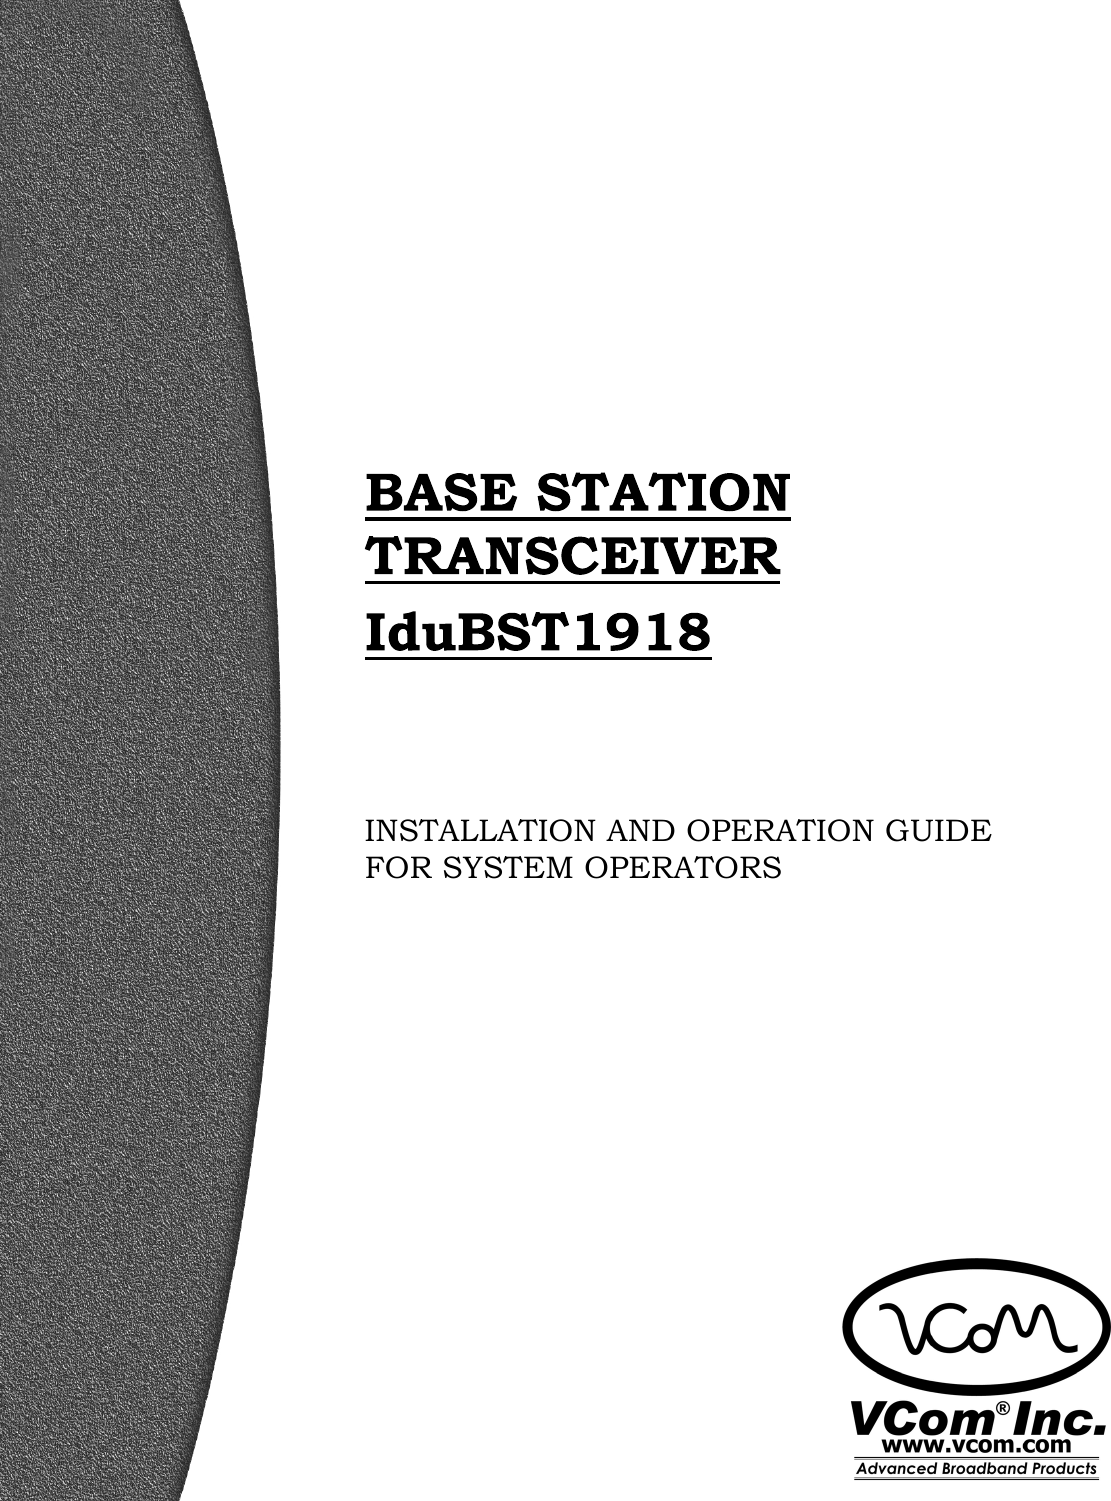     INSTALLATION AND OPERATION GUIDE FOR SYSTEM OPERATORS 